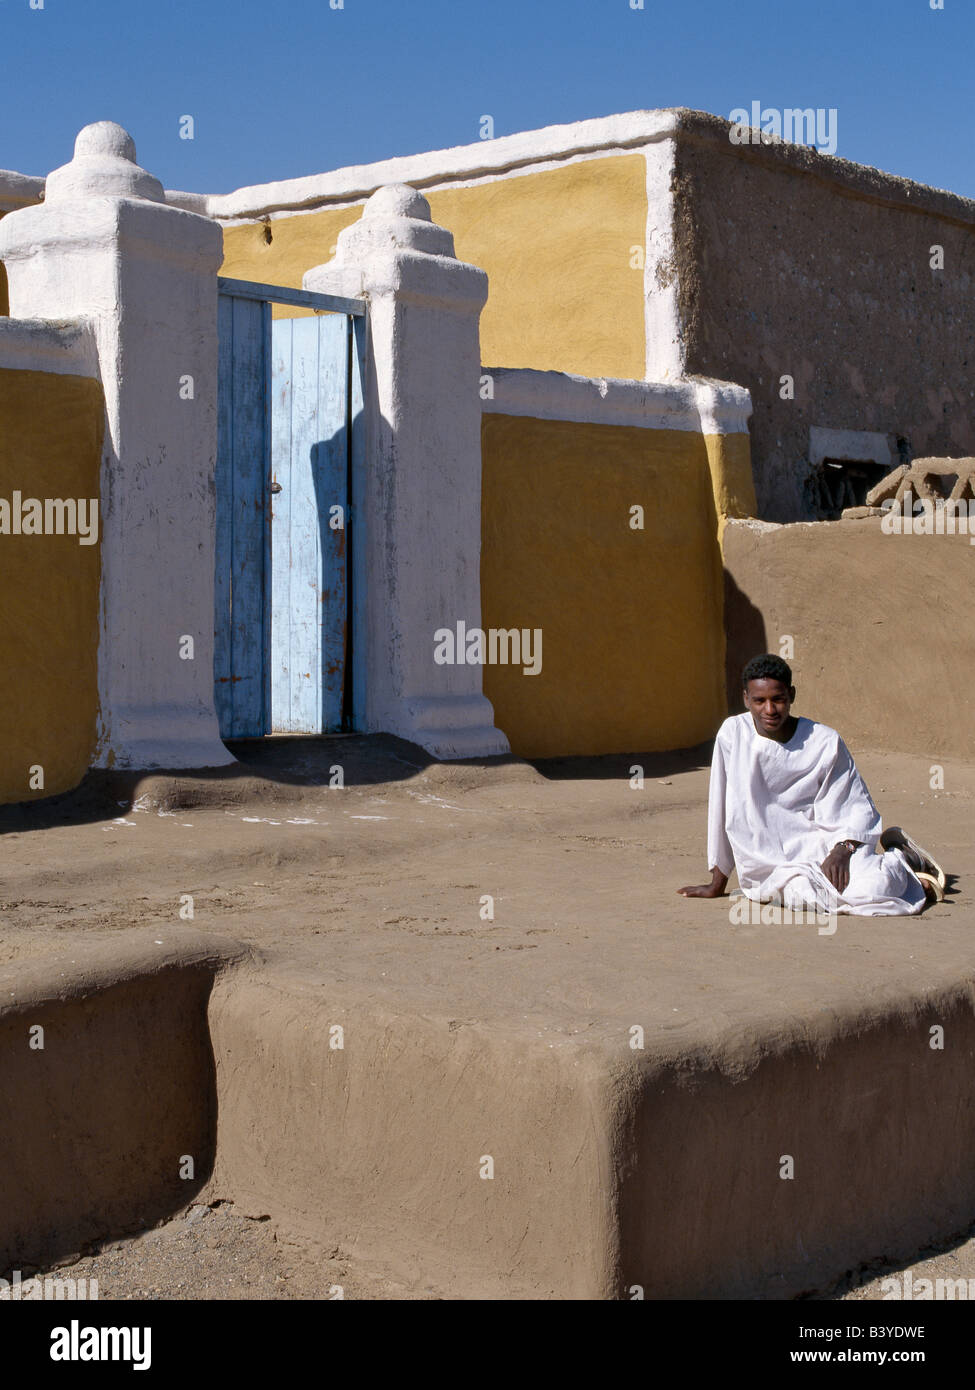 Sudan, Sahara Desert, Qubbat Selim. Traditional Nubian architecture, plasterwork and decoration of the doorways and compounds to houses at Qubbat Selim. Stock Photo